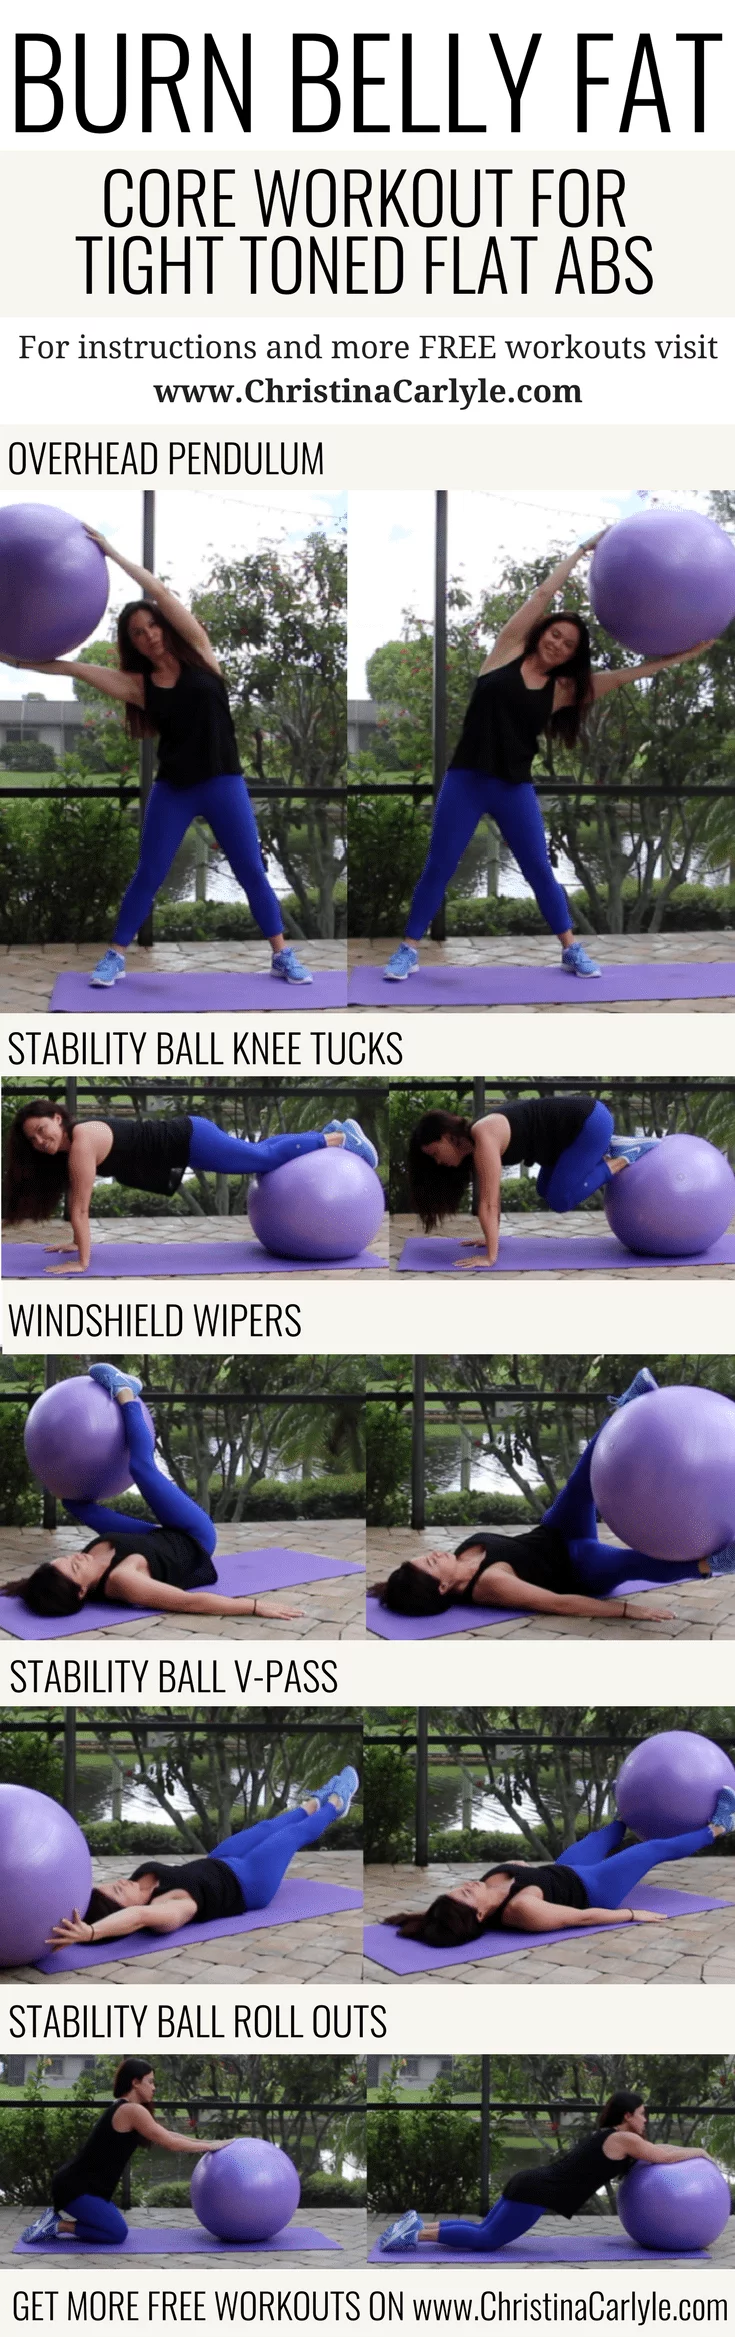 Fat Burning Ab Workout with Stability Ball for Women and Beginners that want flat toned abs https://www.christinacarlyle.com/stability-ball-core-workout/